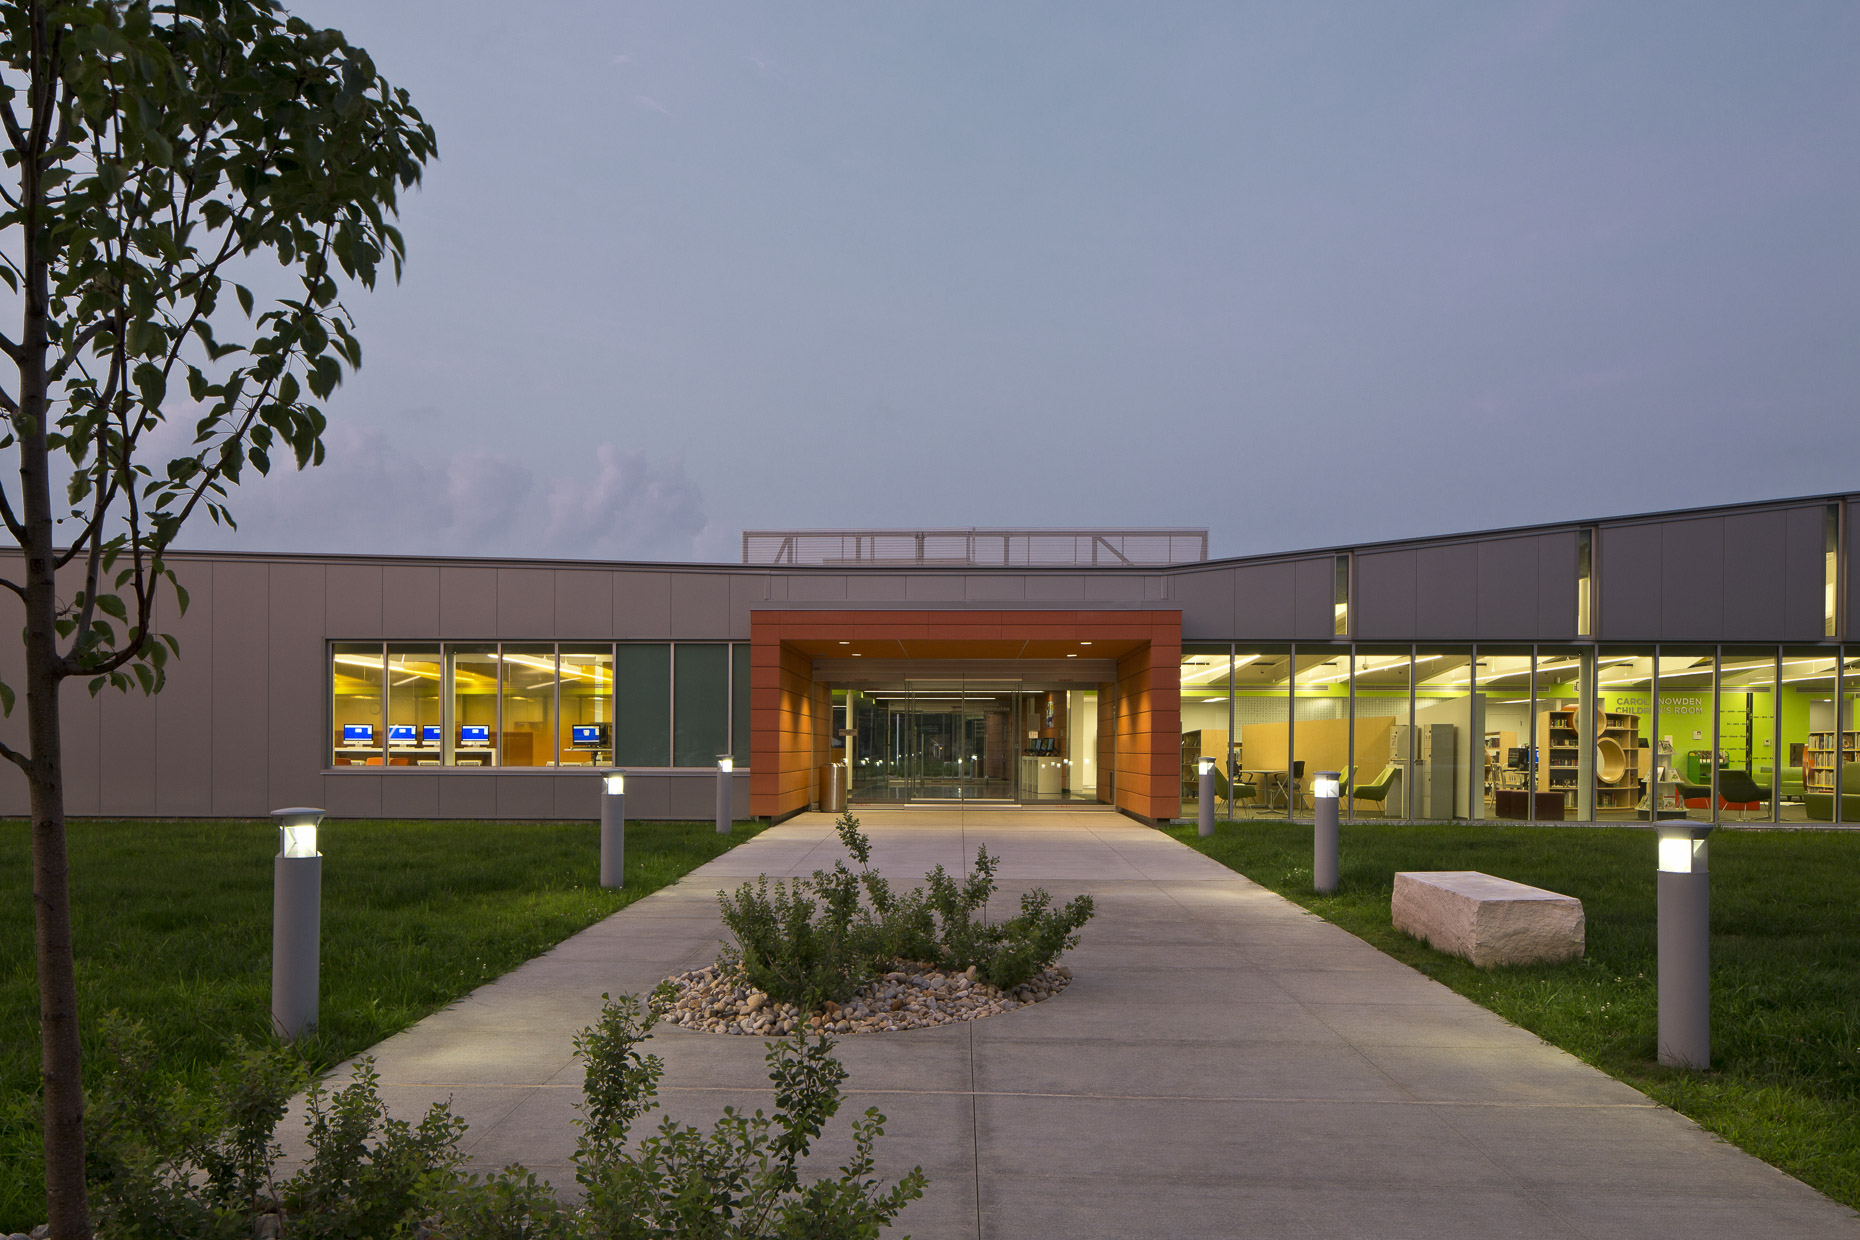 CML Whitehall Branch by JBAD photographed by Brad Feinknopf based in COlumbus, Ohio